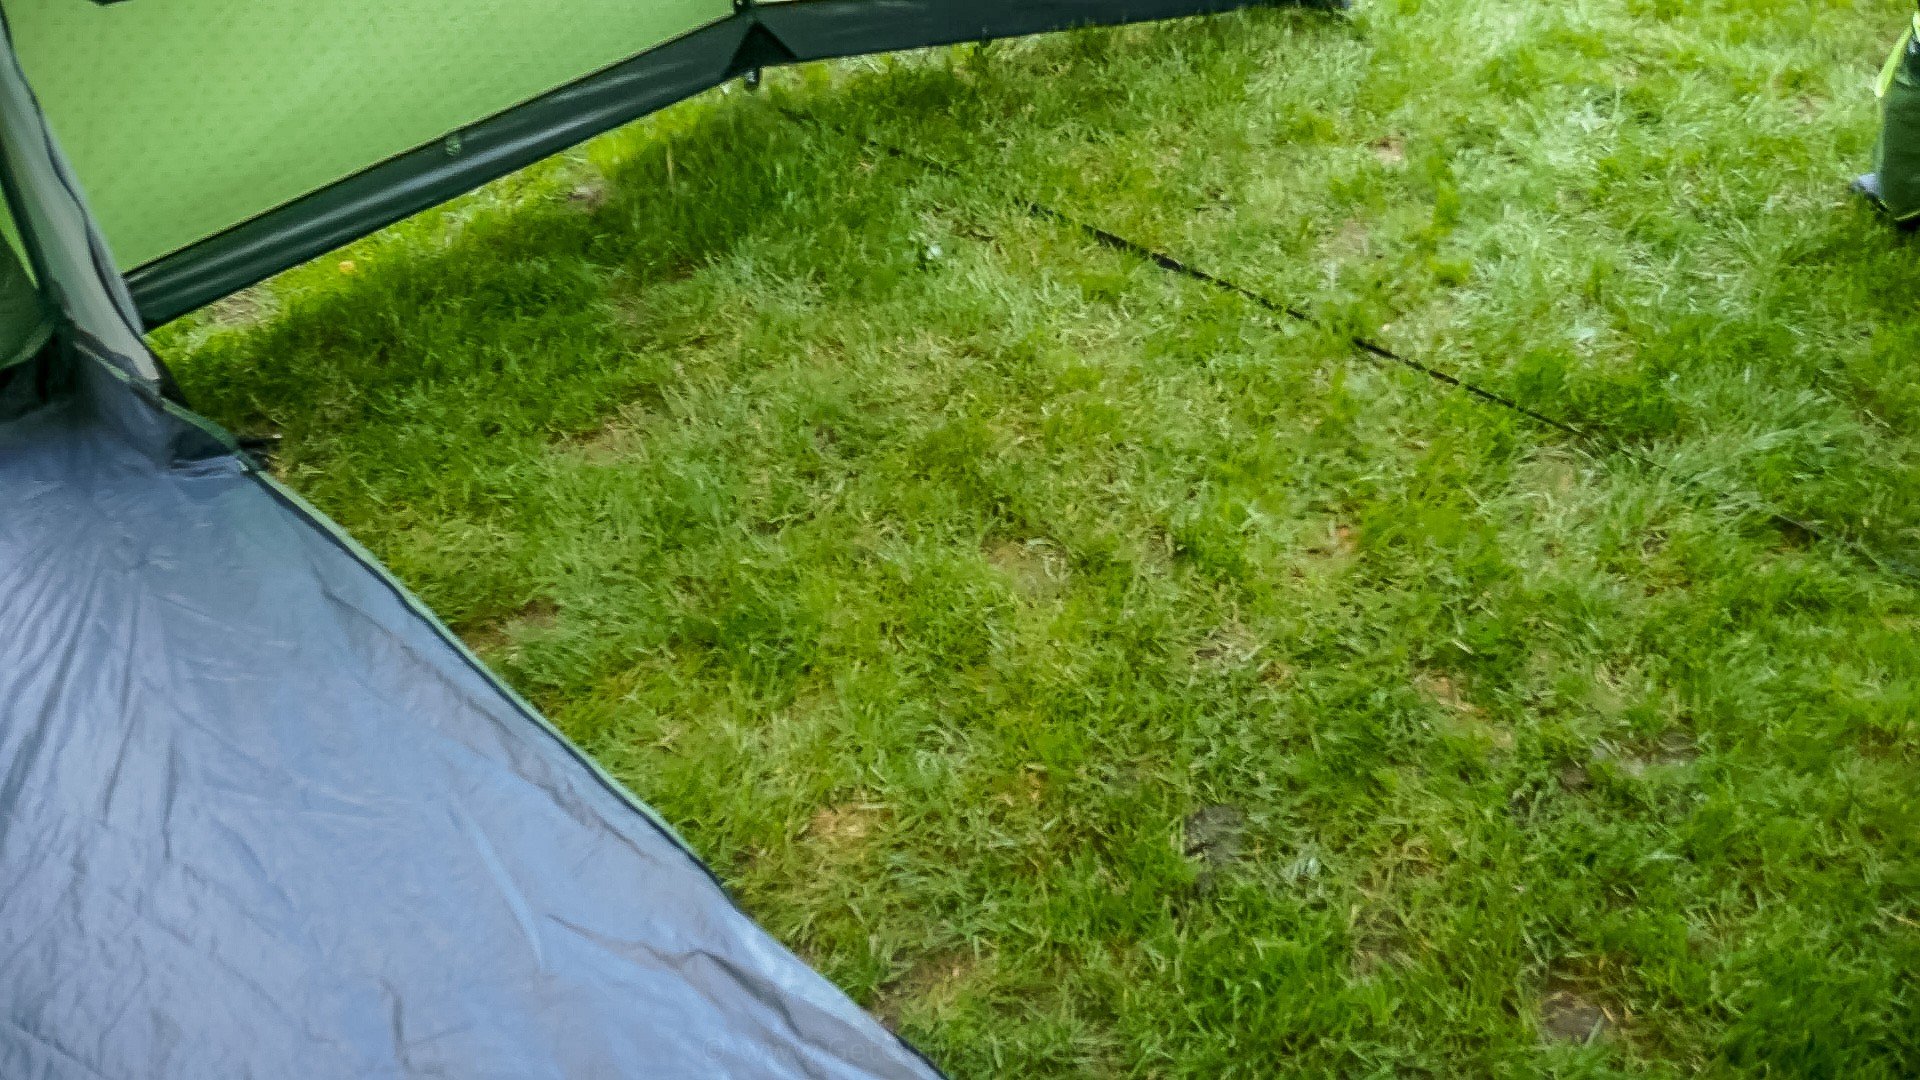 Removeable front groundsheet